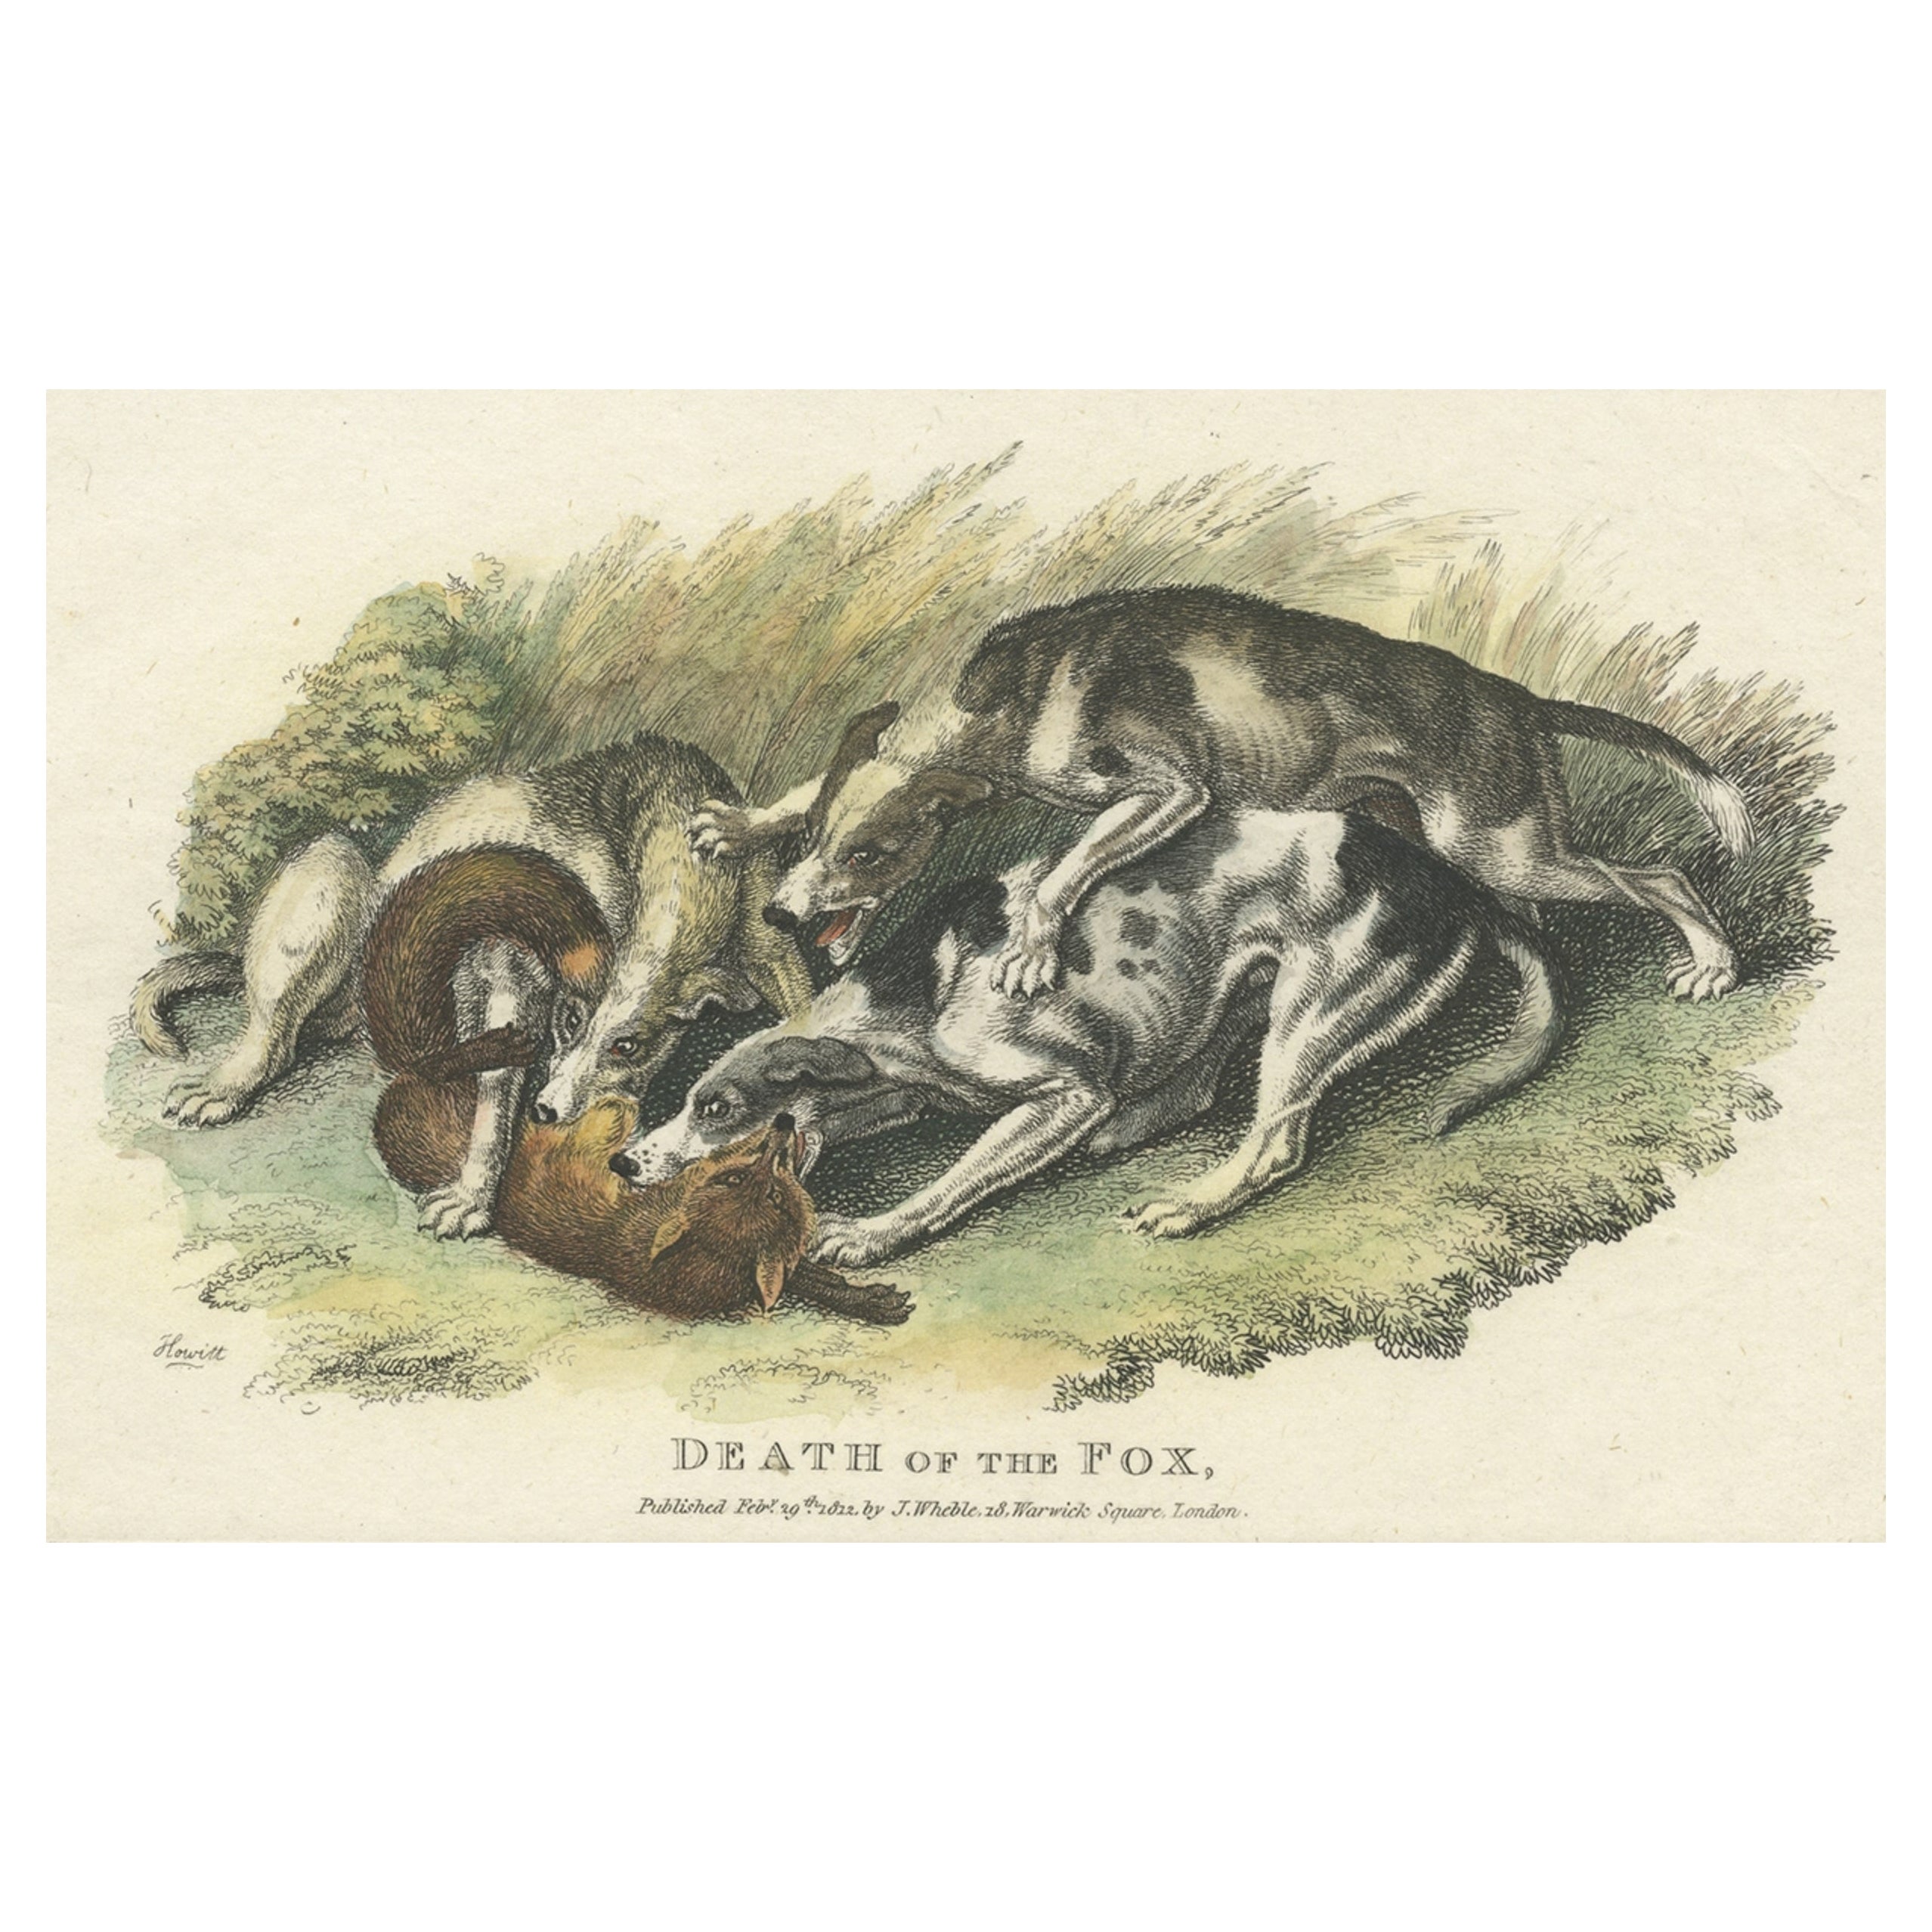 Antique Hand-Colored Print of Hunting Dogs Attacking a Fox, 1812